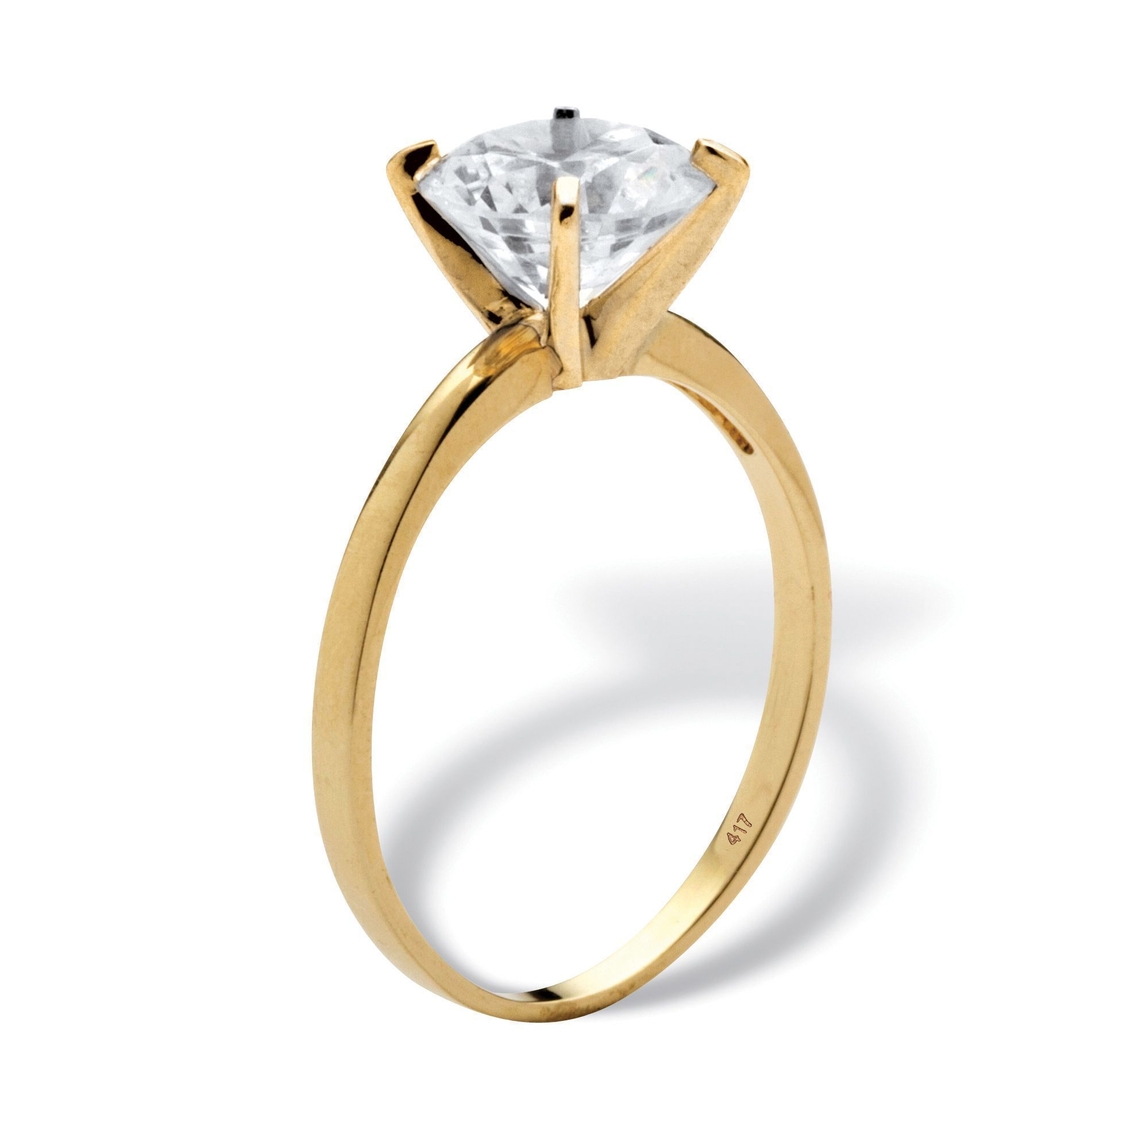 2 TCW Round Cubic Zirconia Solitaire Engagement Ring in Solid 10k Yellow Gold - Image 2 of 5